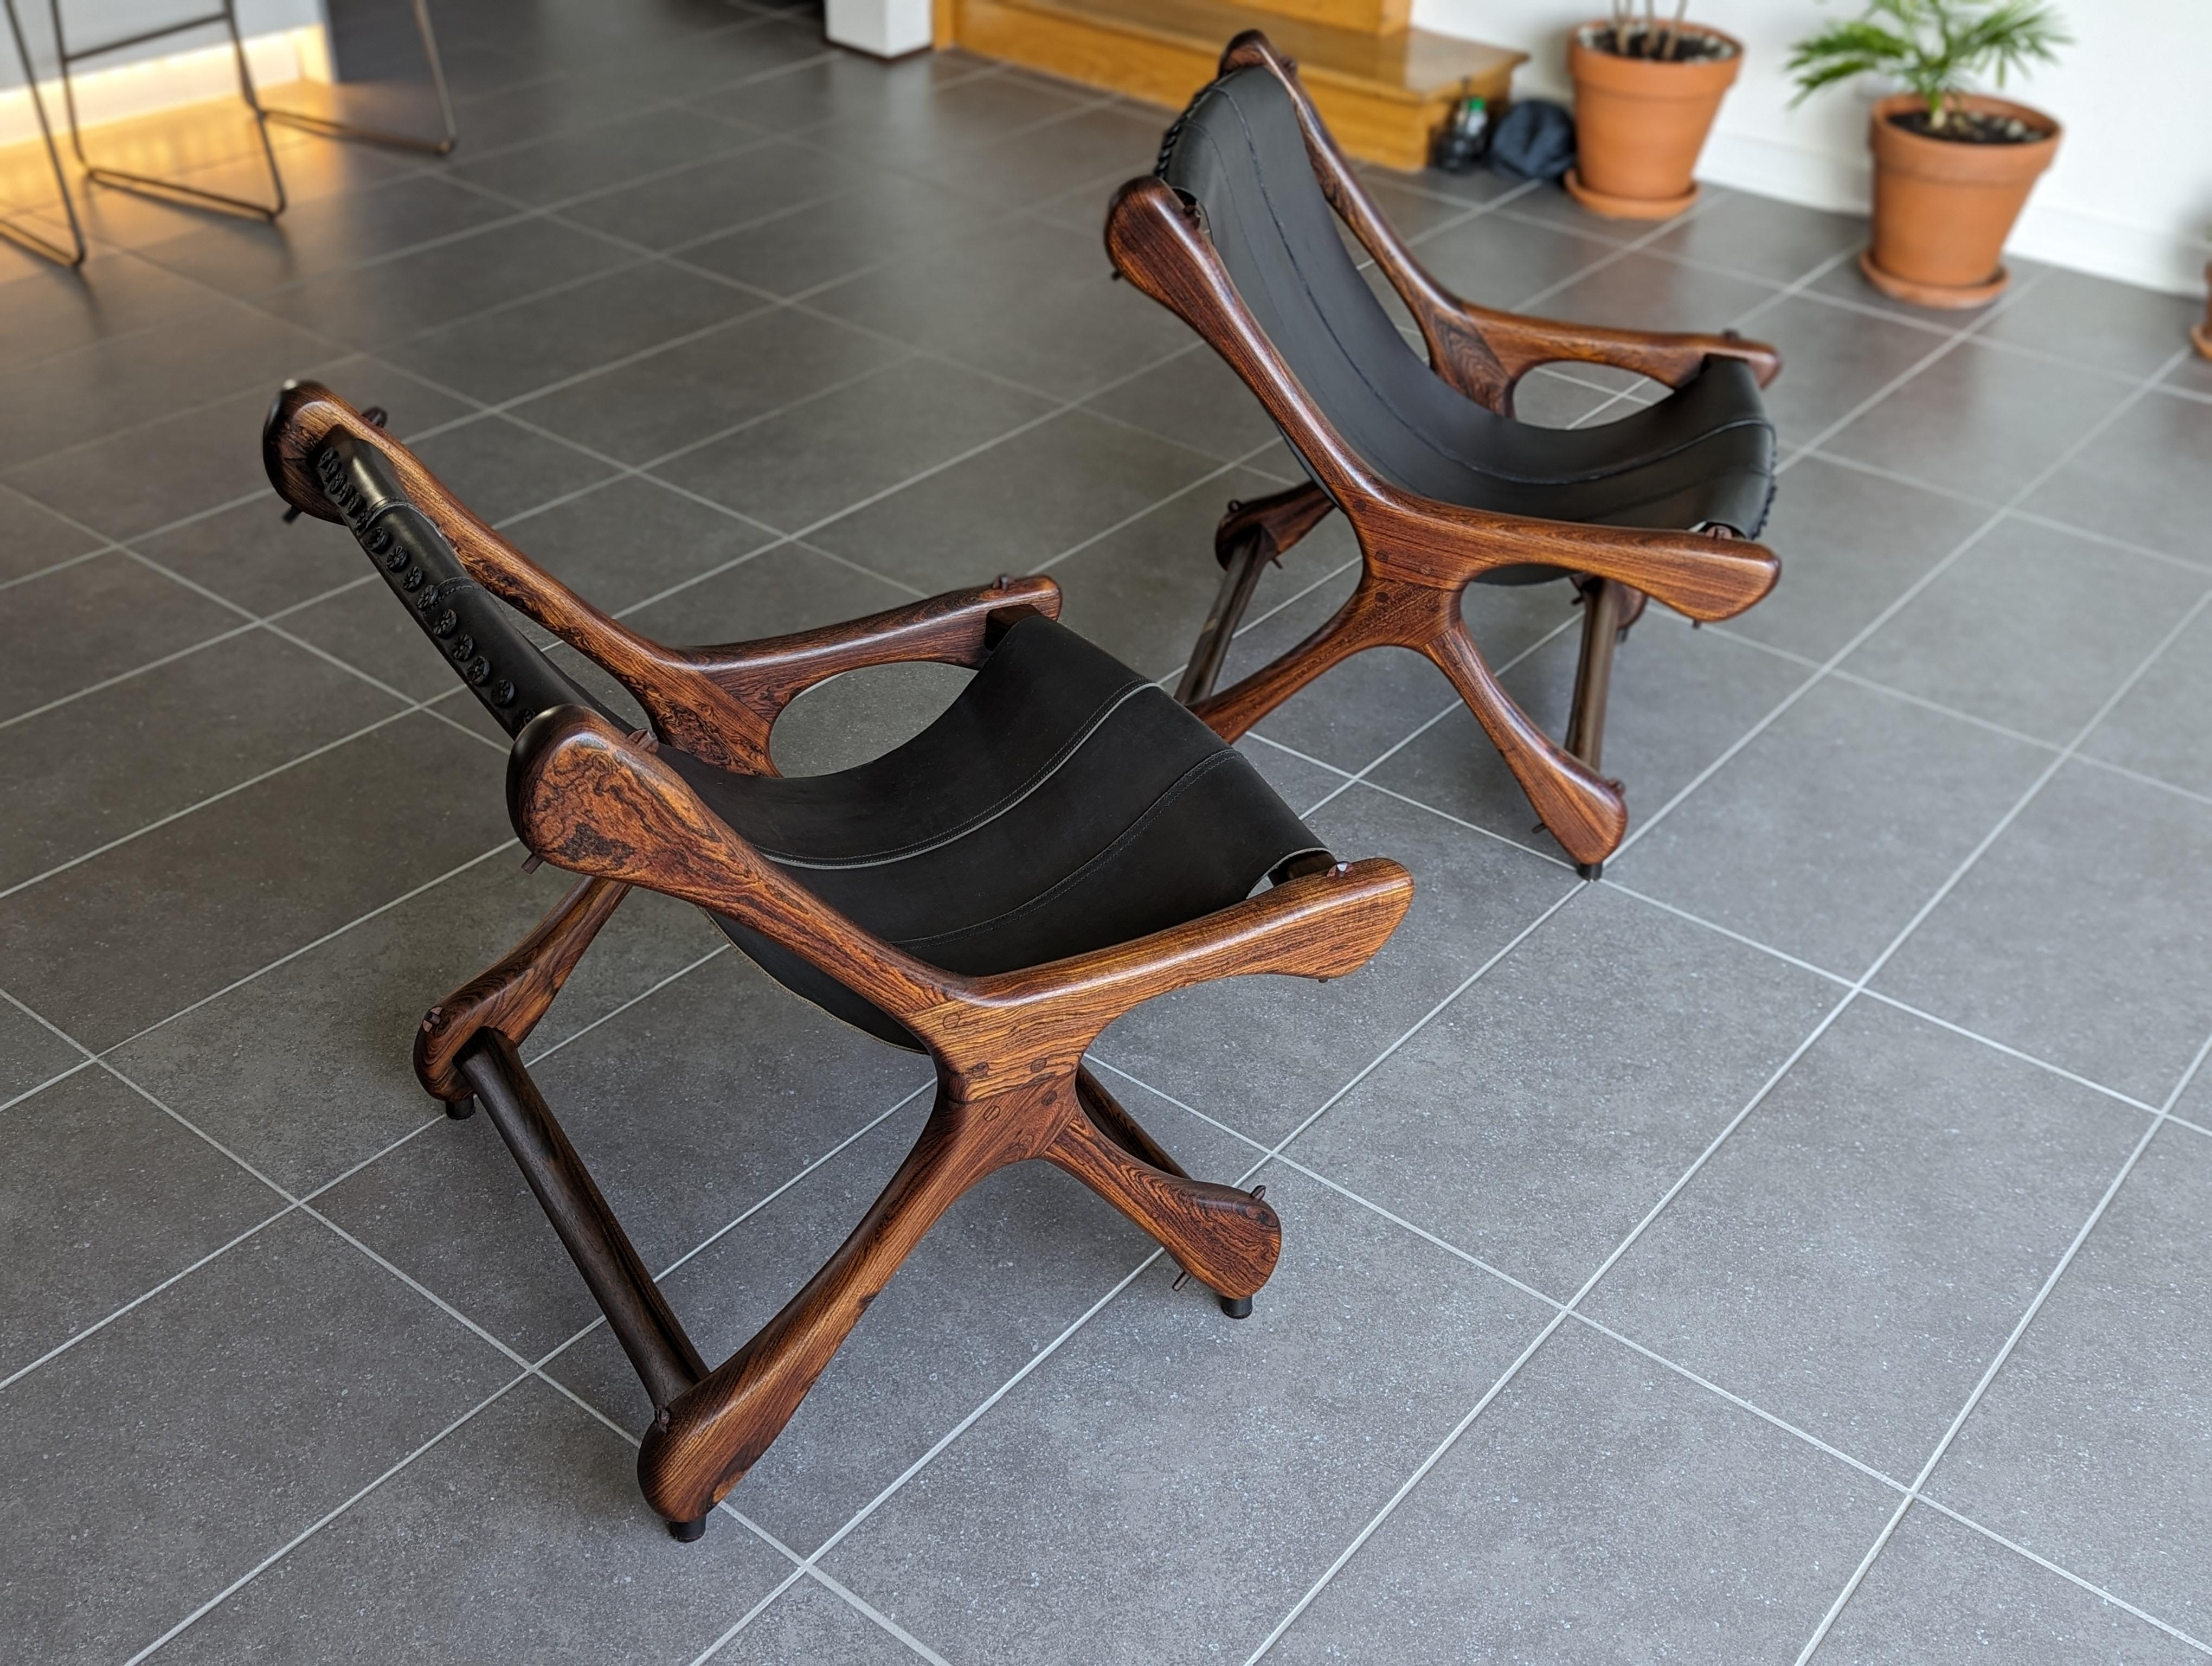 For your consideration, a pair of 1960s Don Shoemaker Sloucher lounge chairs, in solid cocobolo rosewood and black leather. Iconic example of Organic, Mexican Mid-Century Modern design. 

Organic, bone-like shapes and structure, with solid cocobolo